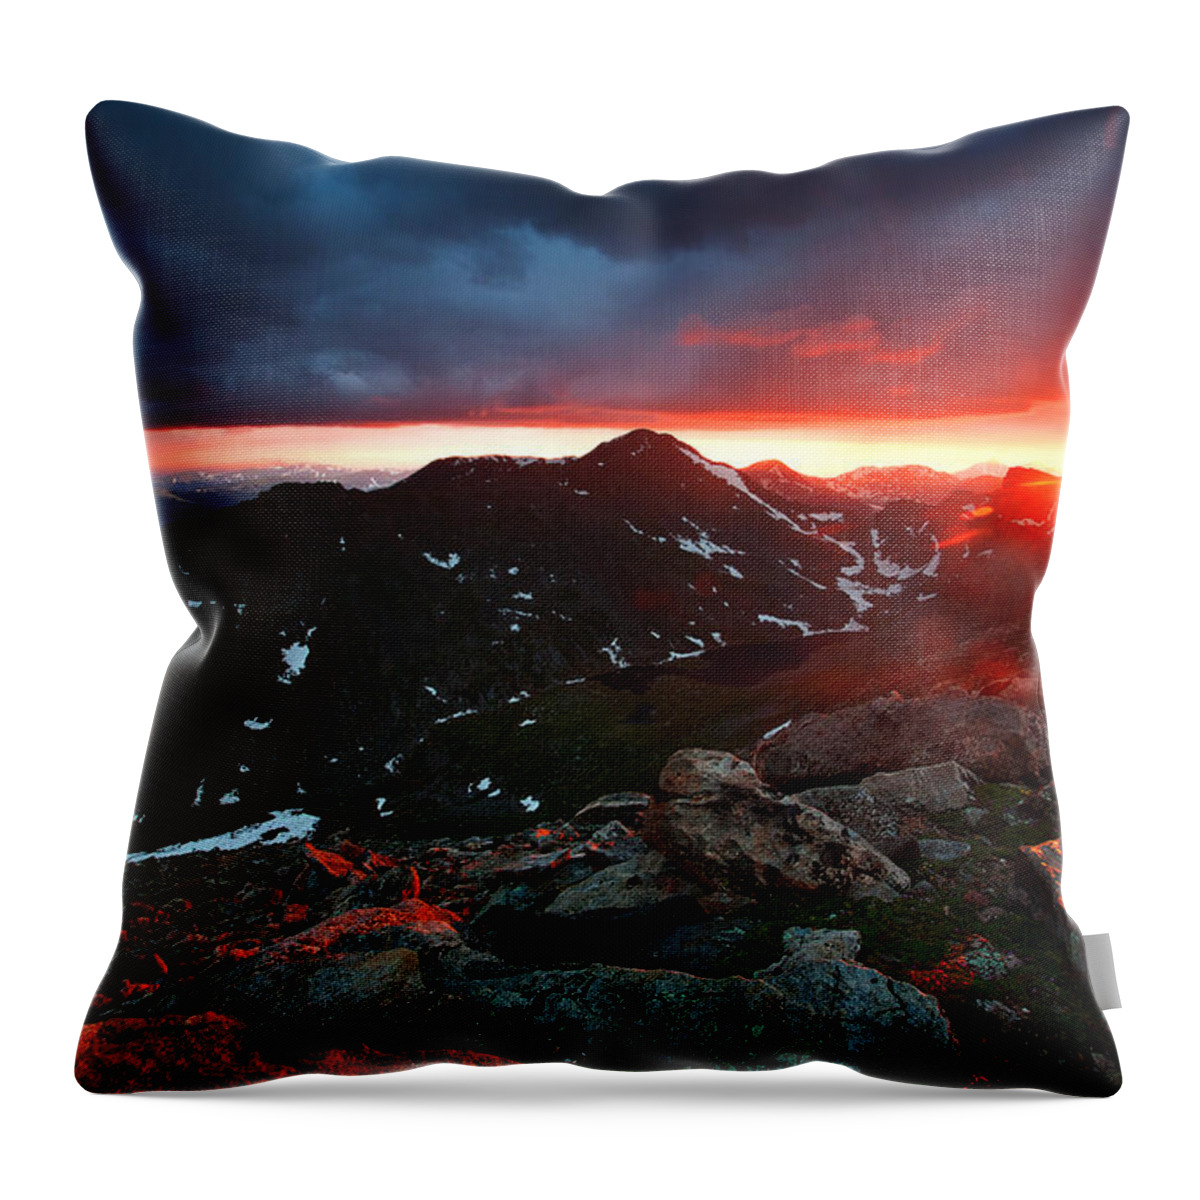 Sunsets Throw Pillow featuring the photograph Goodnight Kiss by Jim Garrison